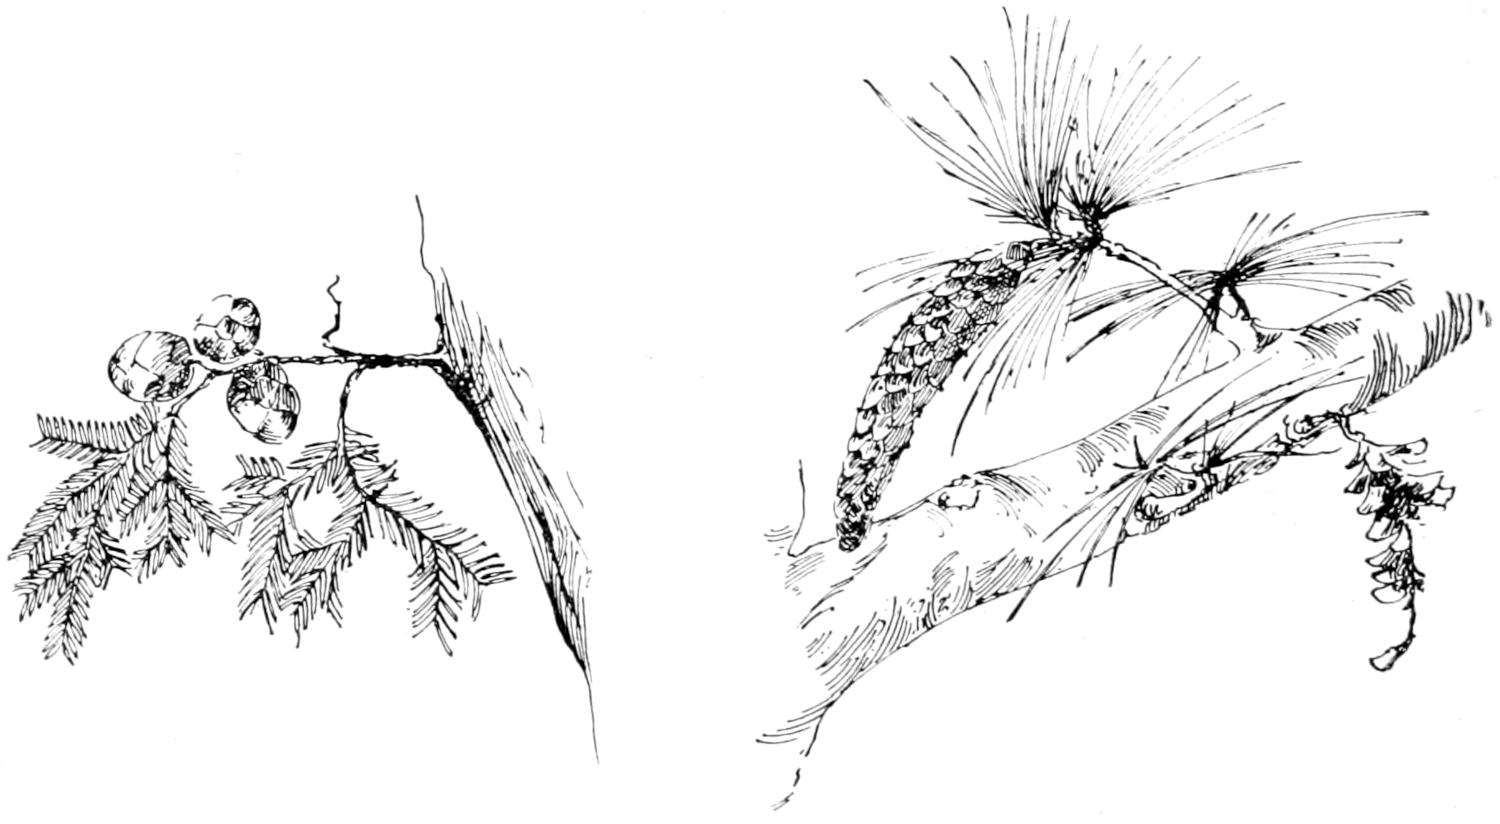 Cypress twig, needles and cone; pine branch and twig, needles and cone